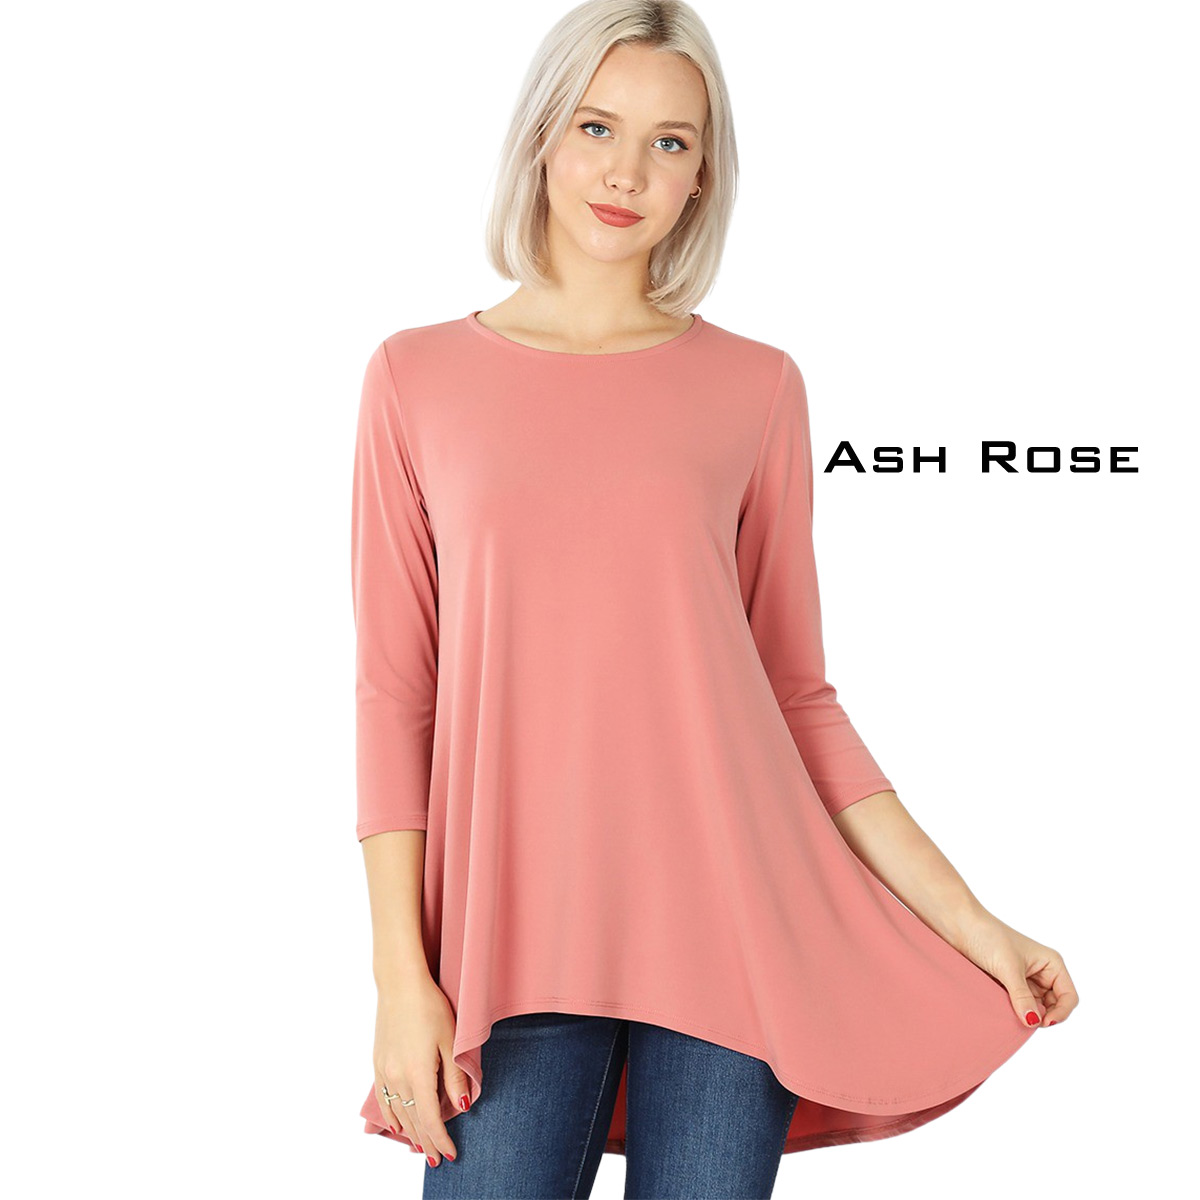 2367 - Ity High-Low 3/4 Sleeve Top ASH ROSE Ity High-Low 3/4 Sleeve Top 2367 - Large